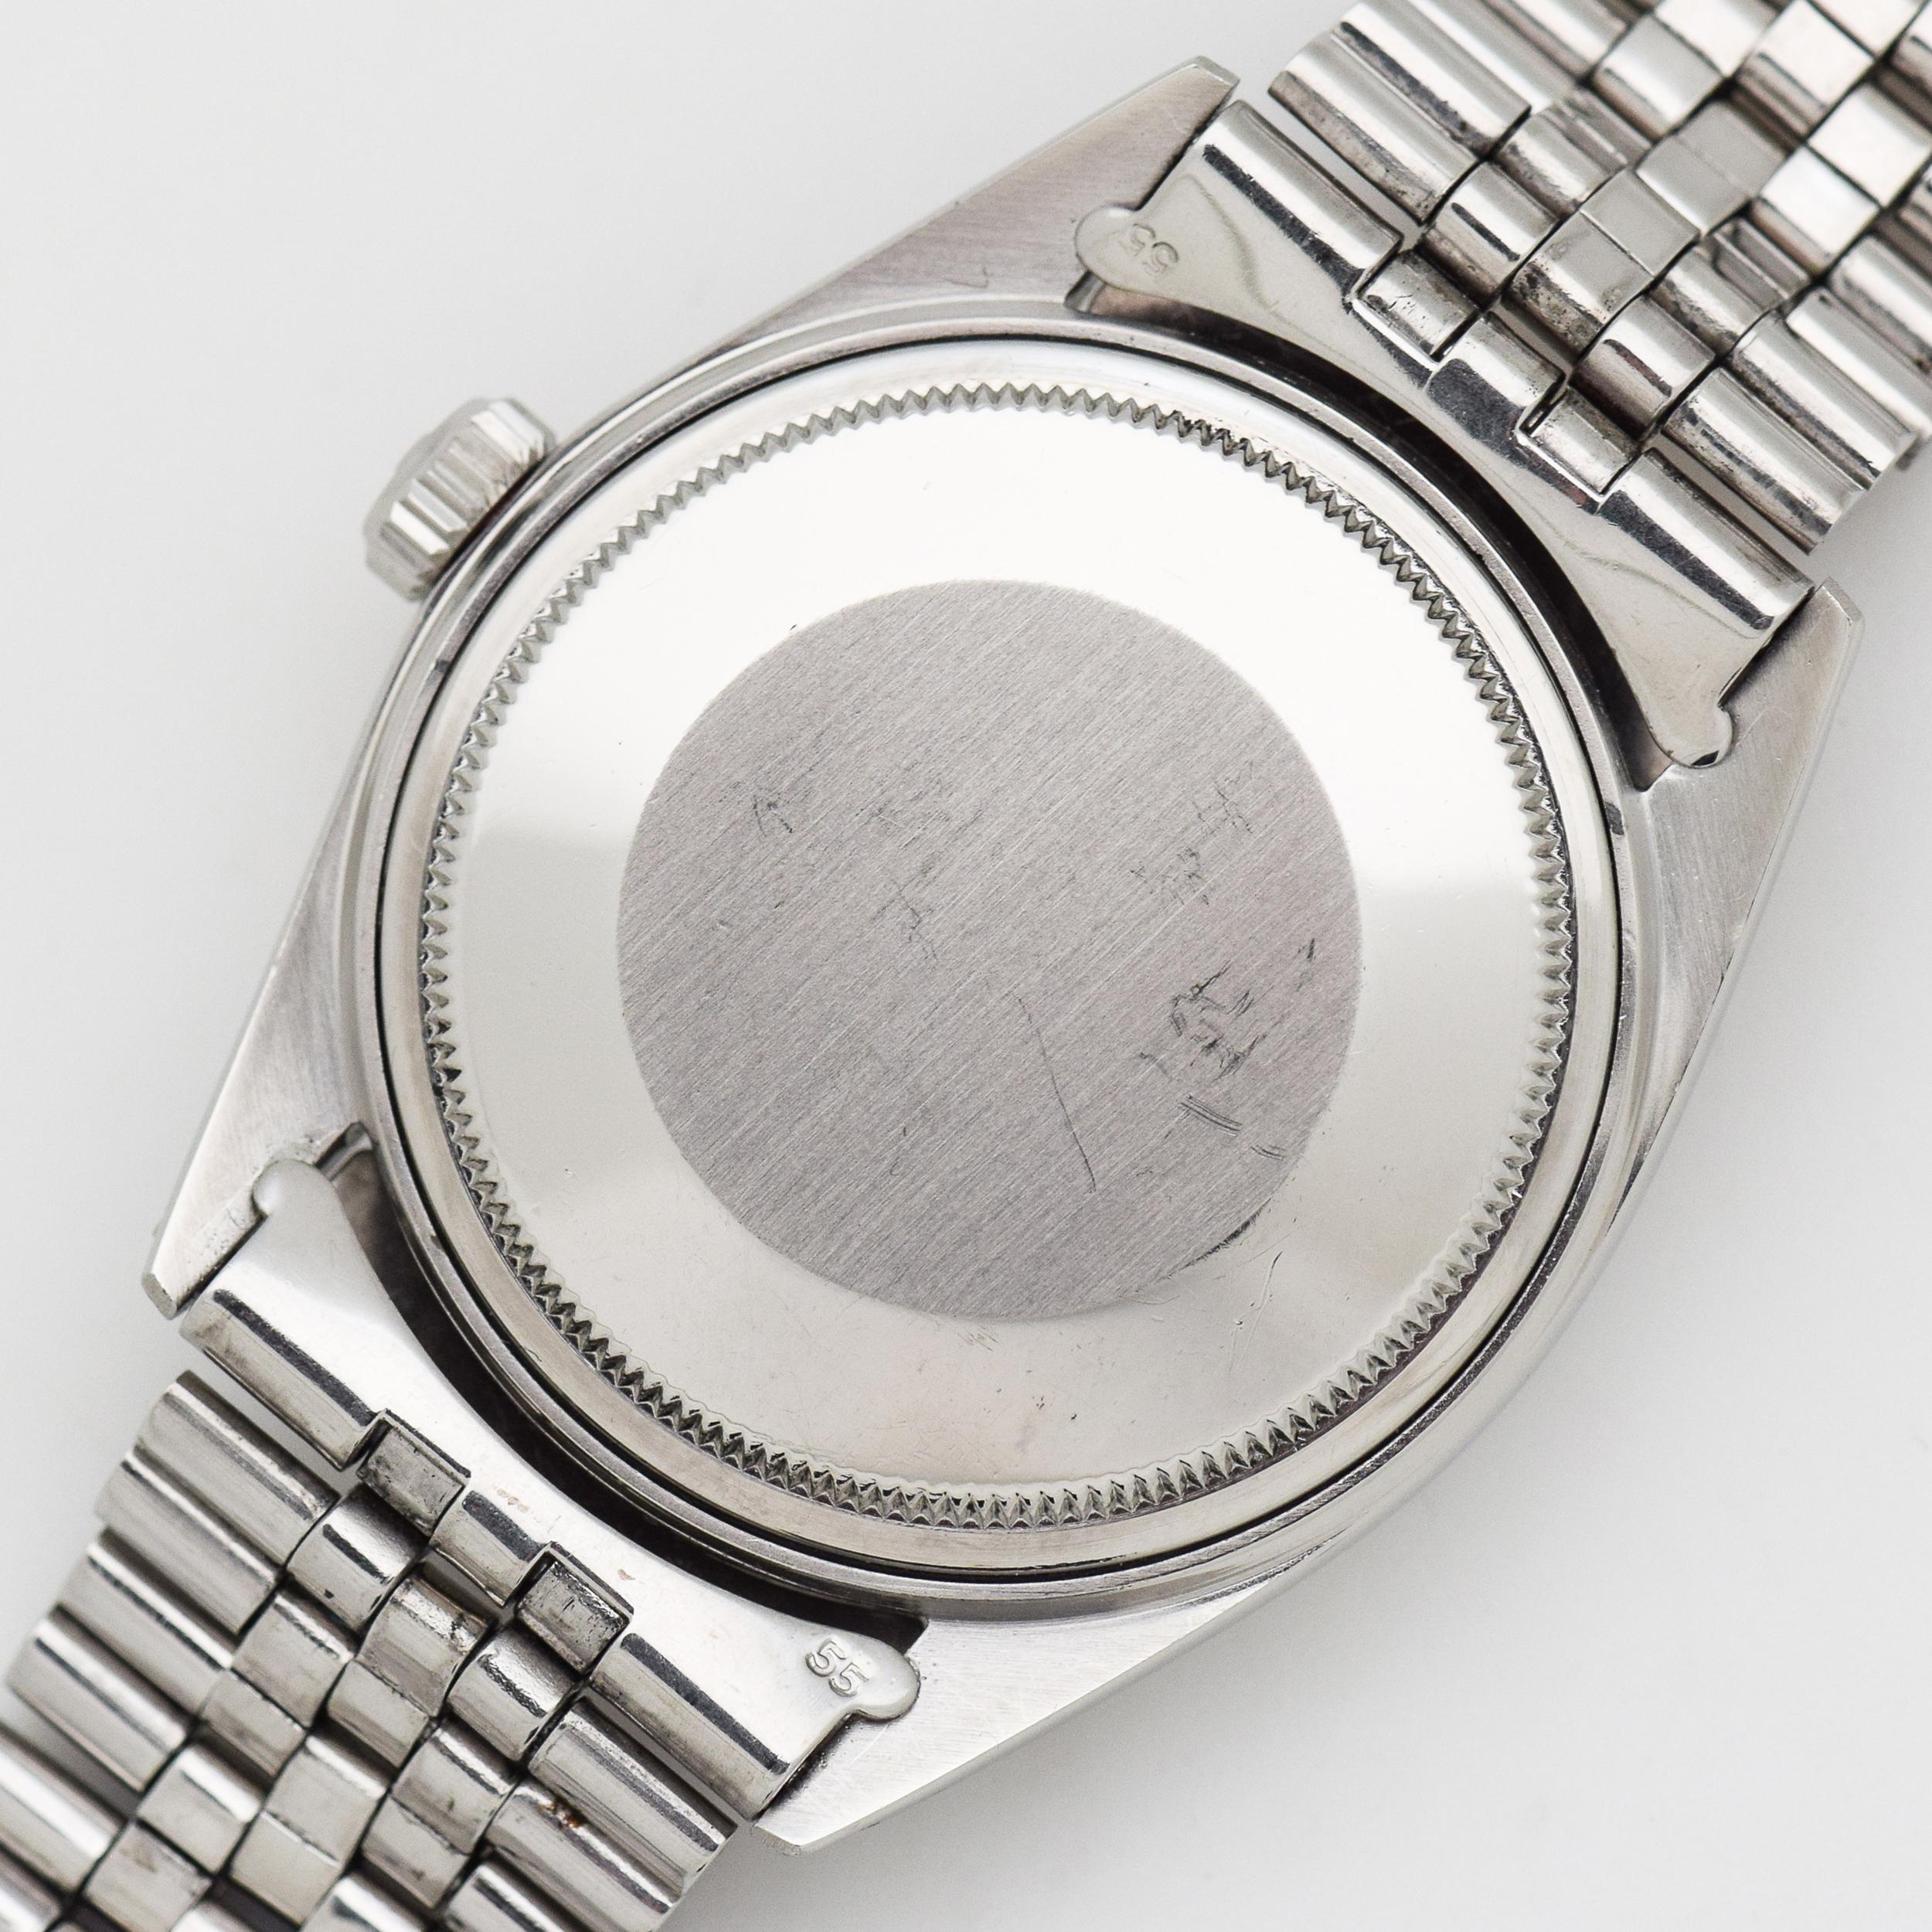 Vintage Rolex Datejust Reference 1603 Stainless Steel Watch, 1970 In Excellent Condition For Sale In Beverly Hills, CA